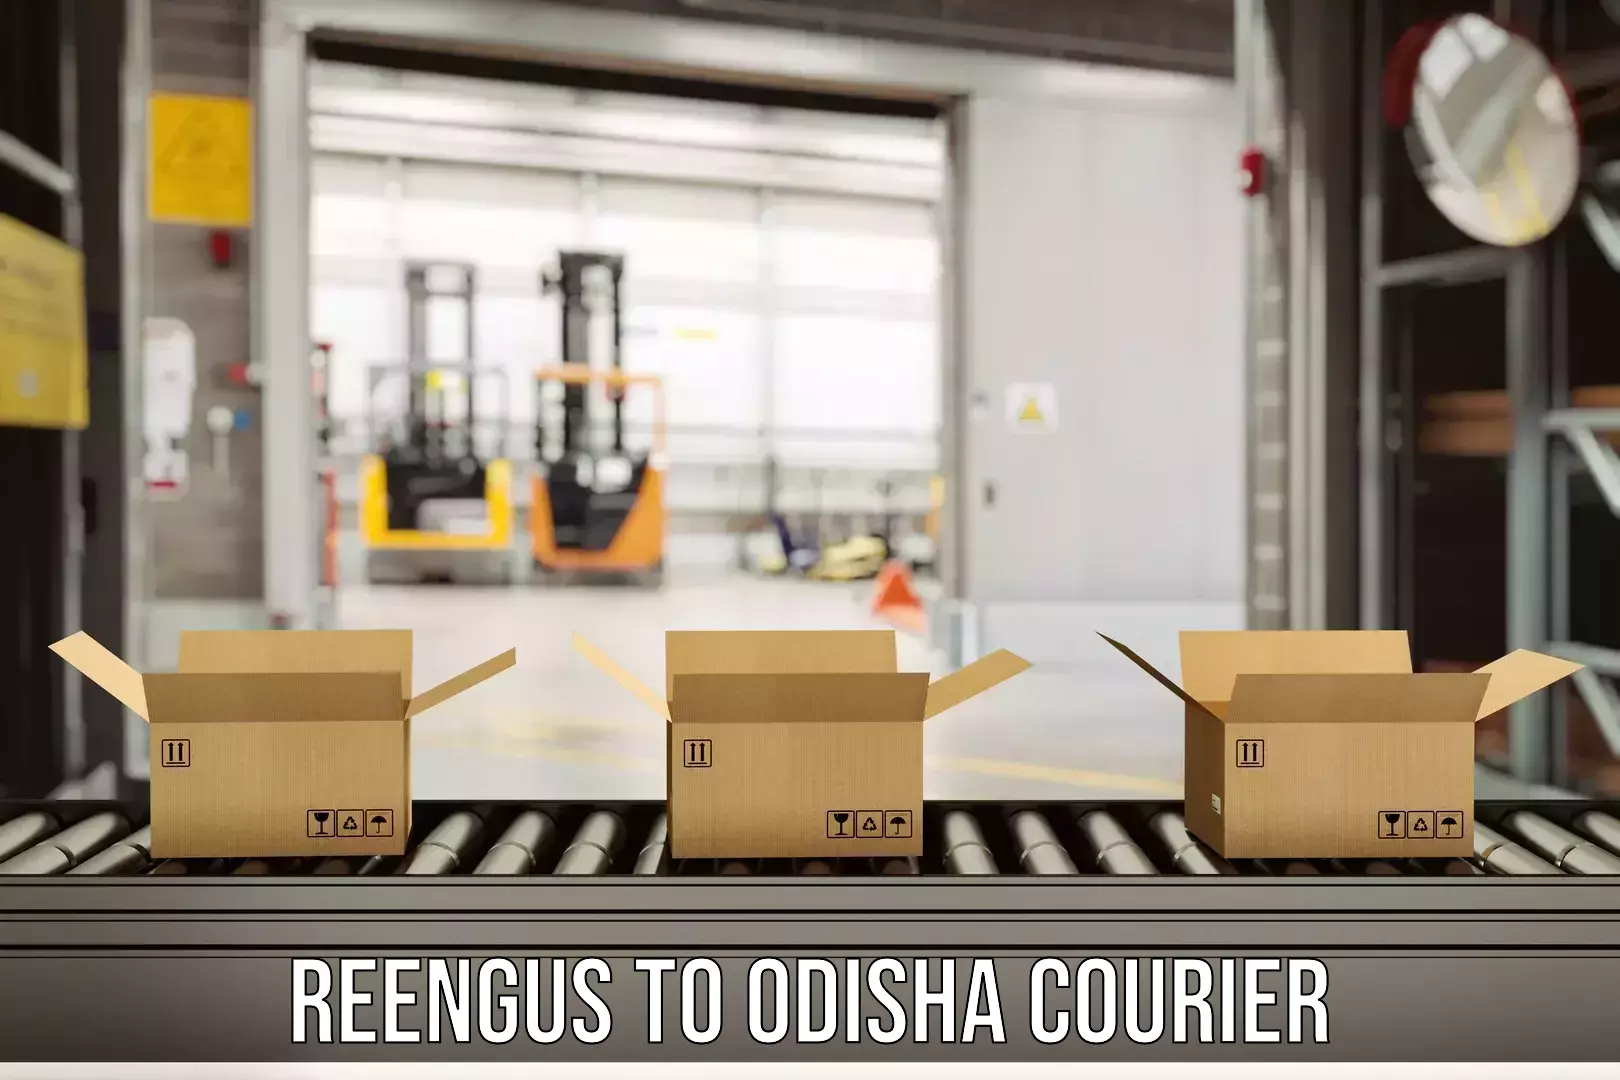 24/7 courier service Reengus to Mathili